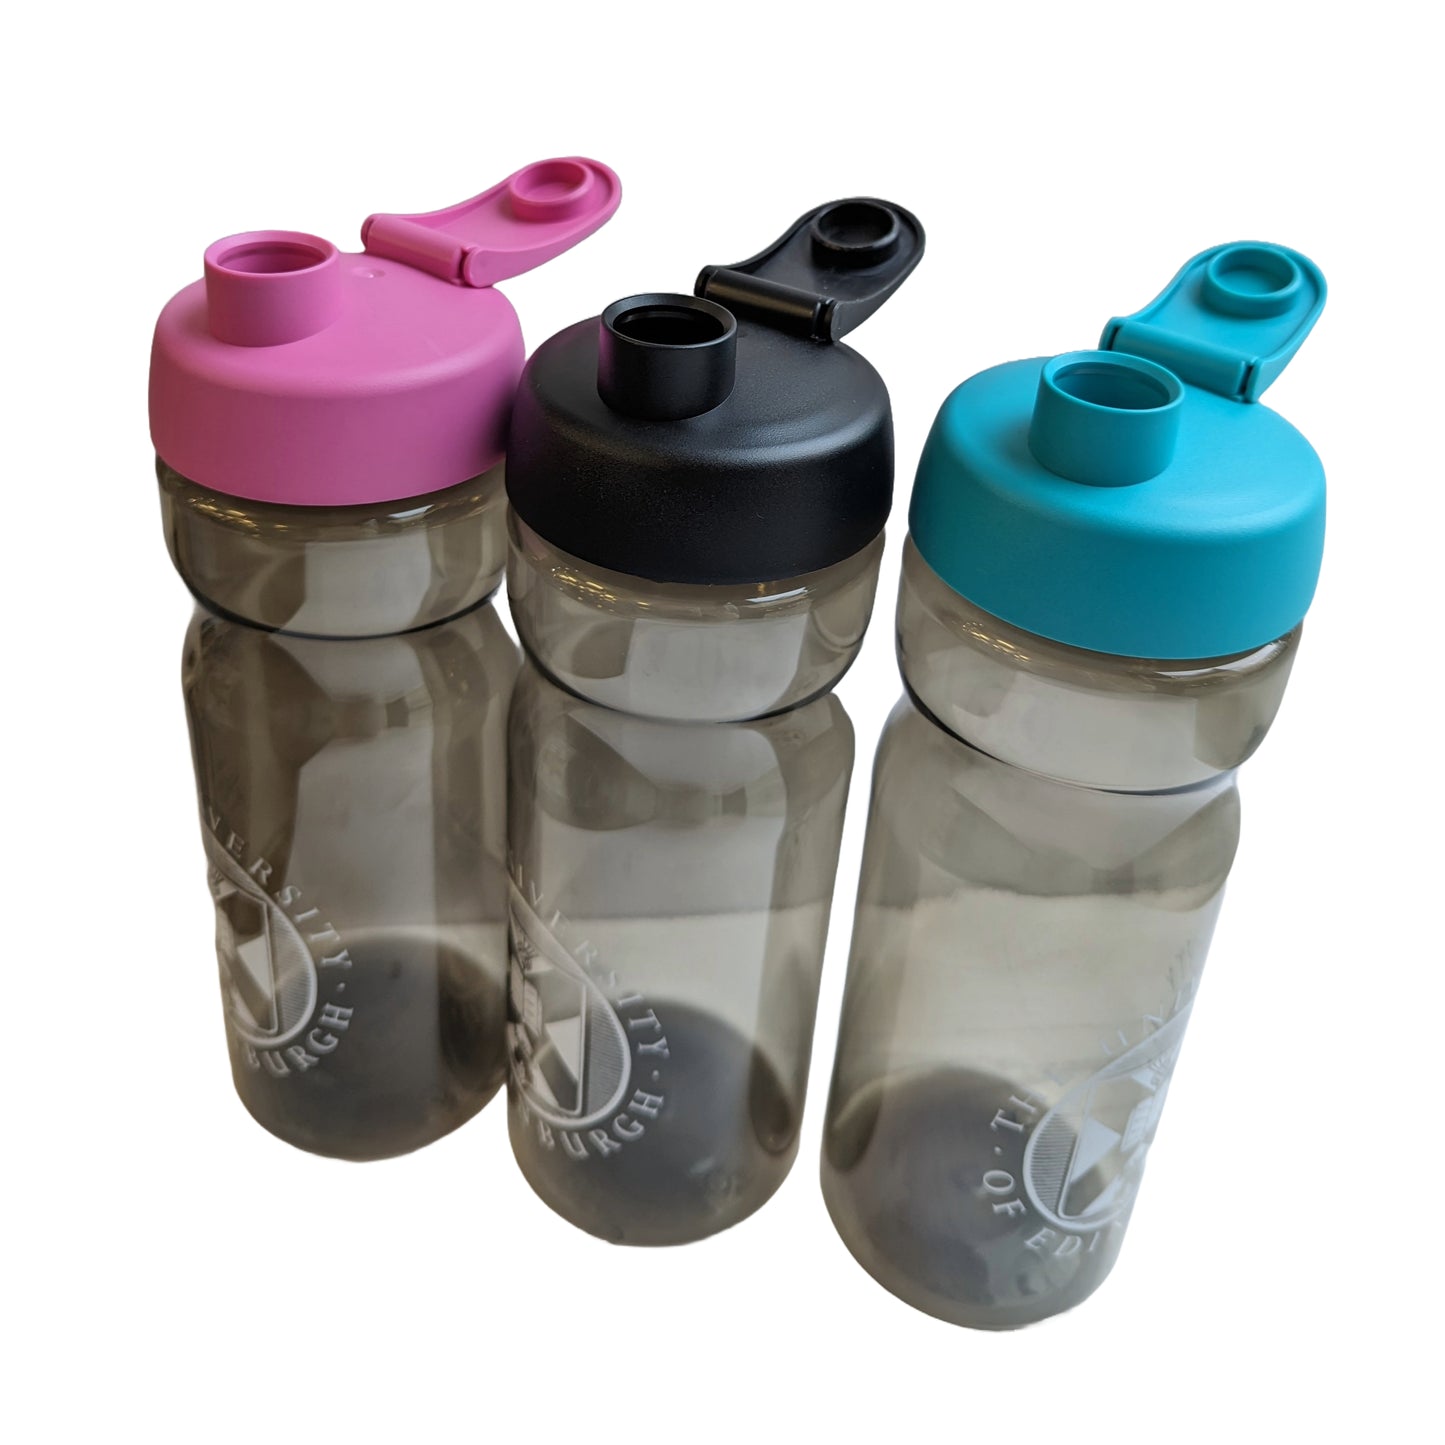 Three dark grey opaque bottles with their lids open. From left to right: water bottle with a pink cap and white logo, bottle with a black cap and white logo, bottle with a blue/teal cap and a white logo.